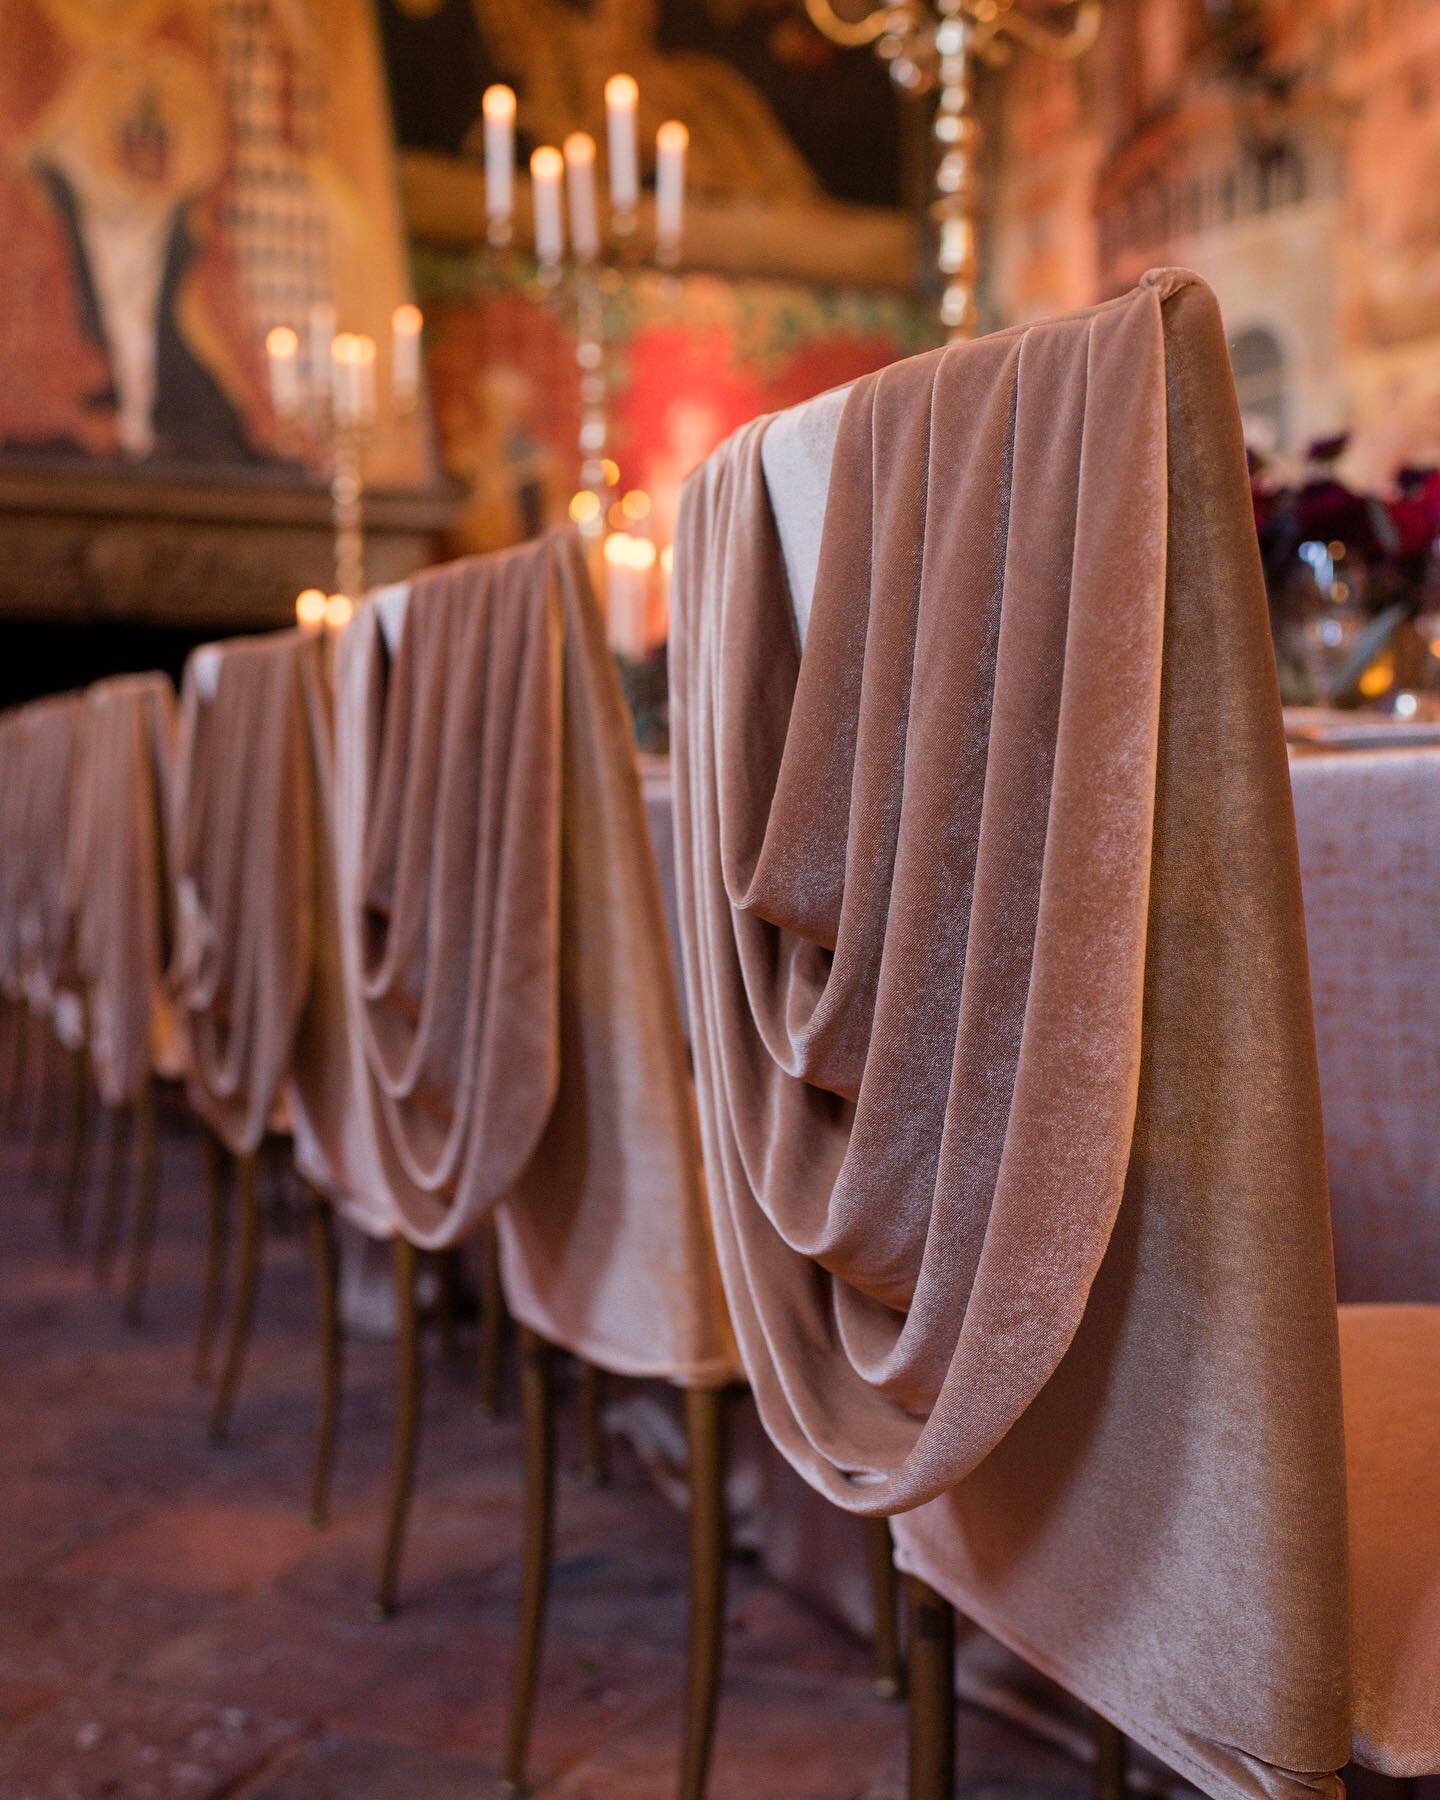 When the back of your chair is as elegant as the back of your dress&hellip; #eventplanner #eventdesign #modeventdesign #napavalley #eventdesignedbymod #no50 #royalstyle